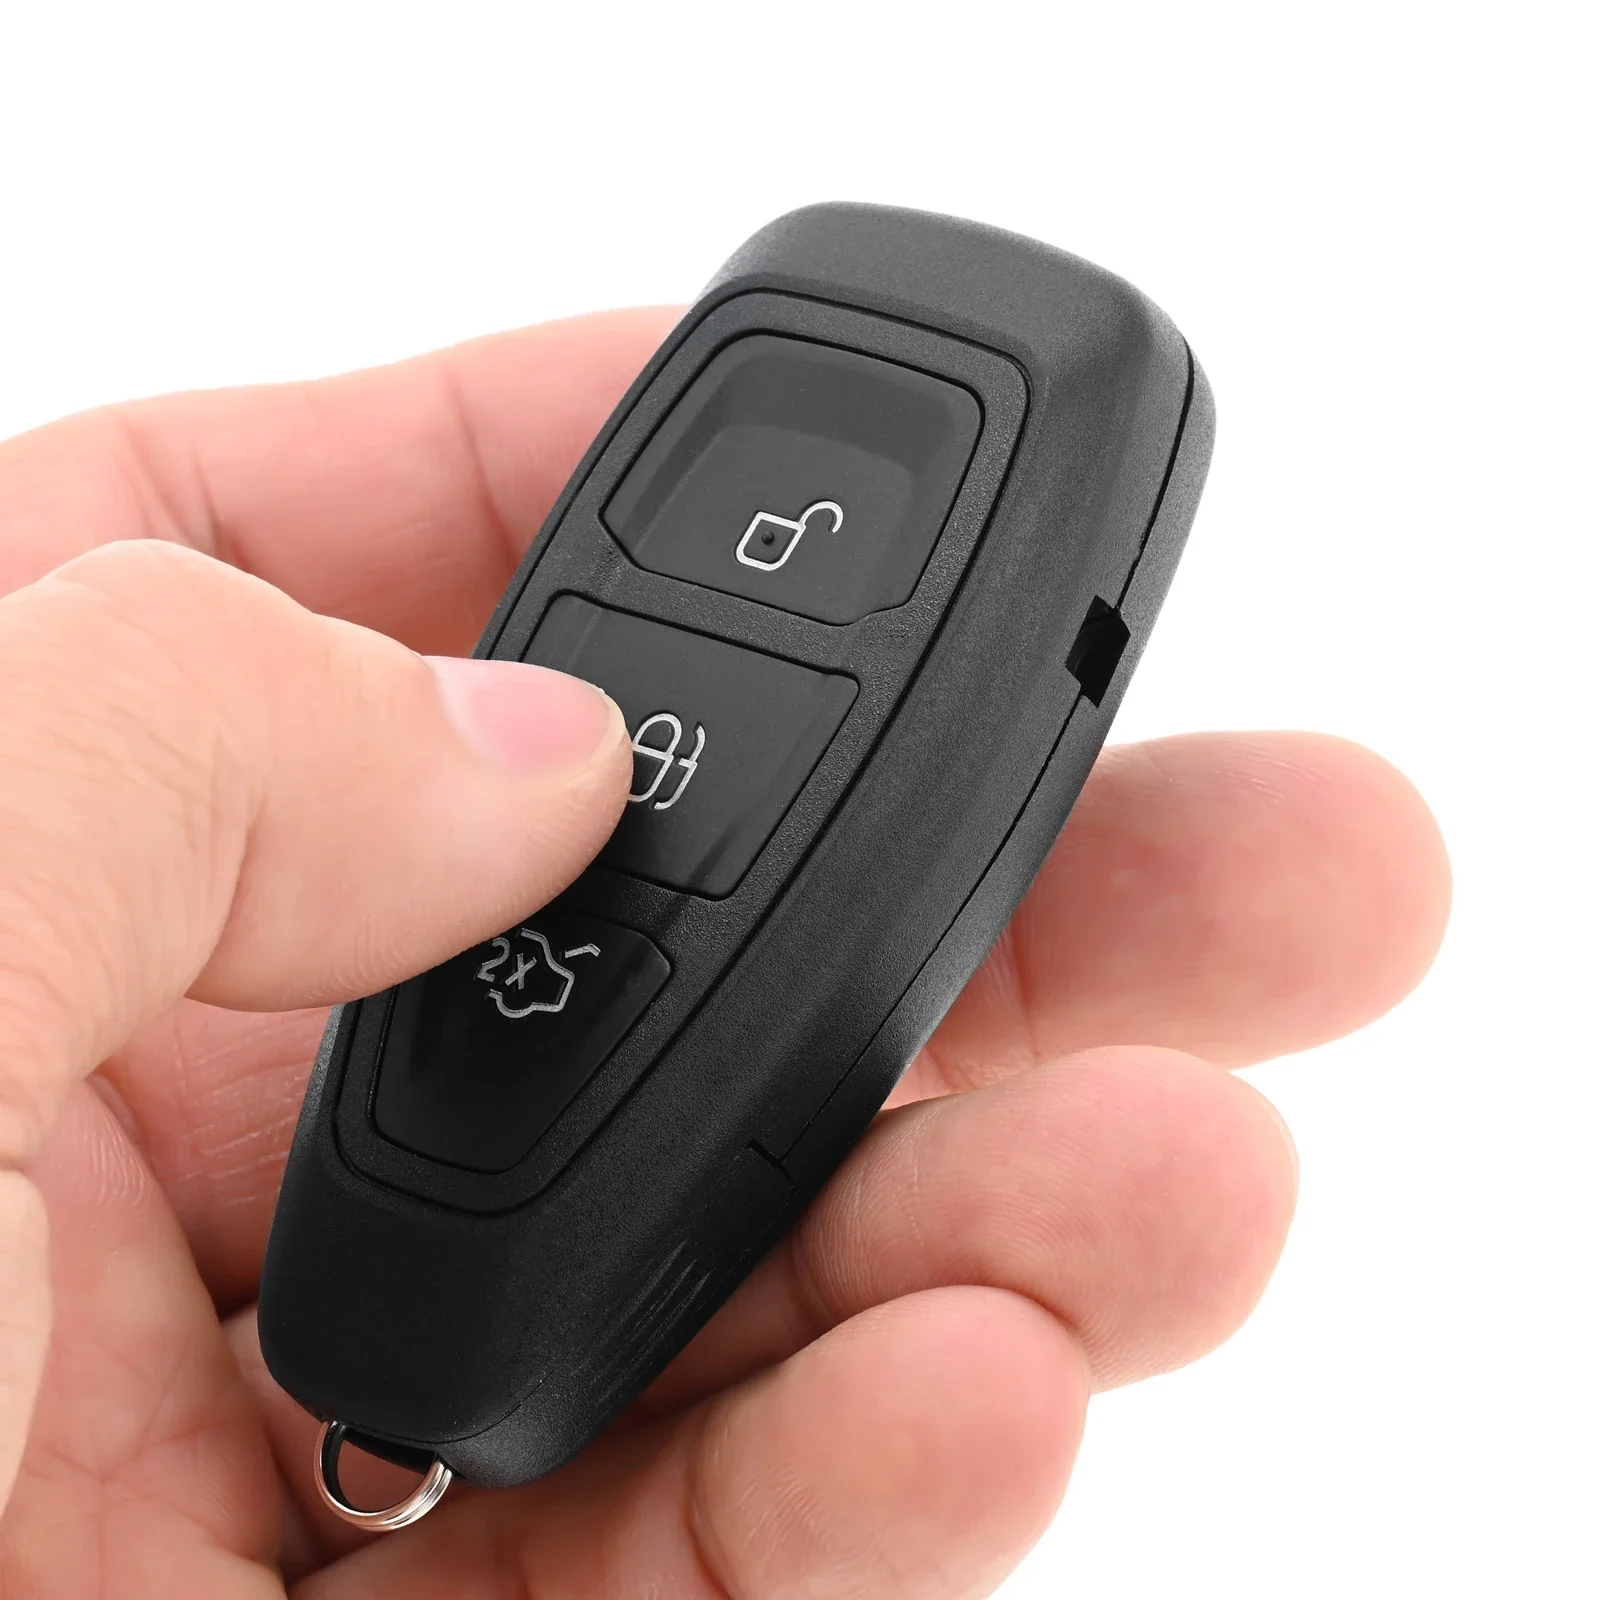 

3 Buttons Car Key Fob Case Replacement for Ford Fiesta Focus Kuga Grand S-Max C-Max Galaxy Monde Car Remote Control Key Fob Case